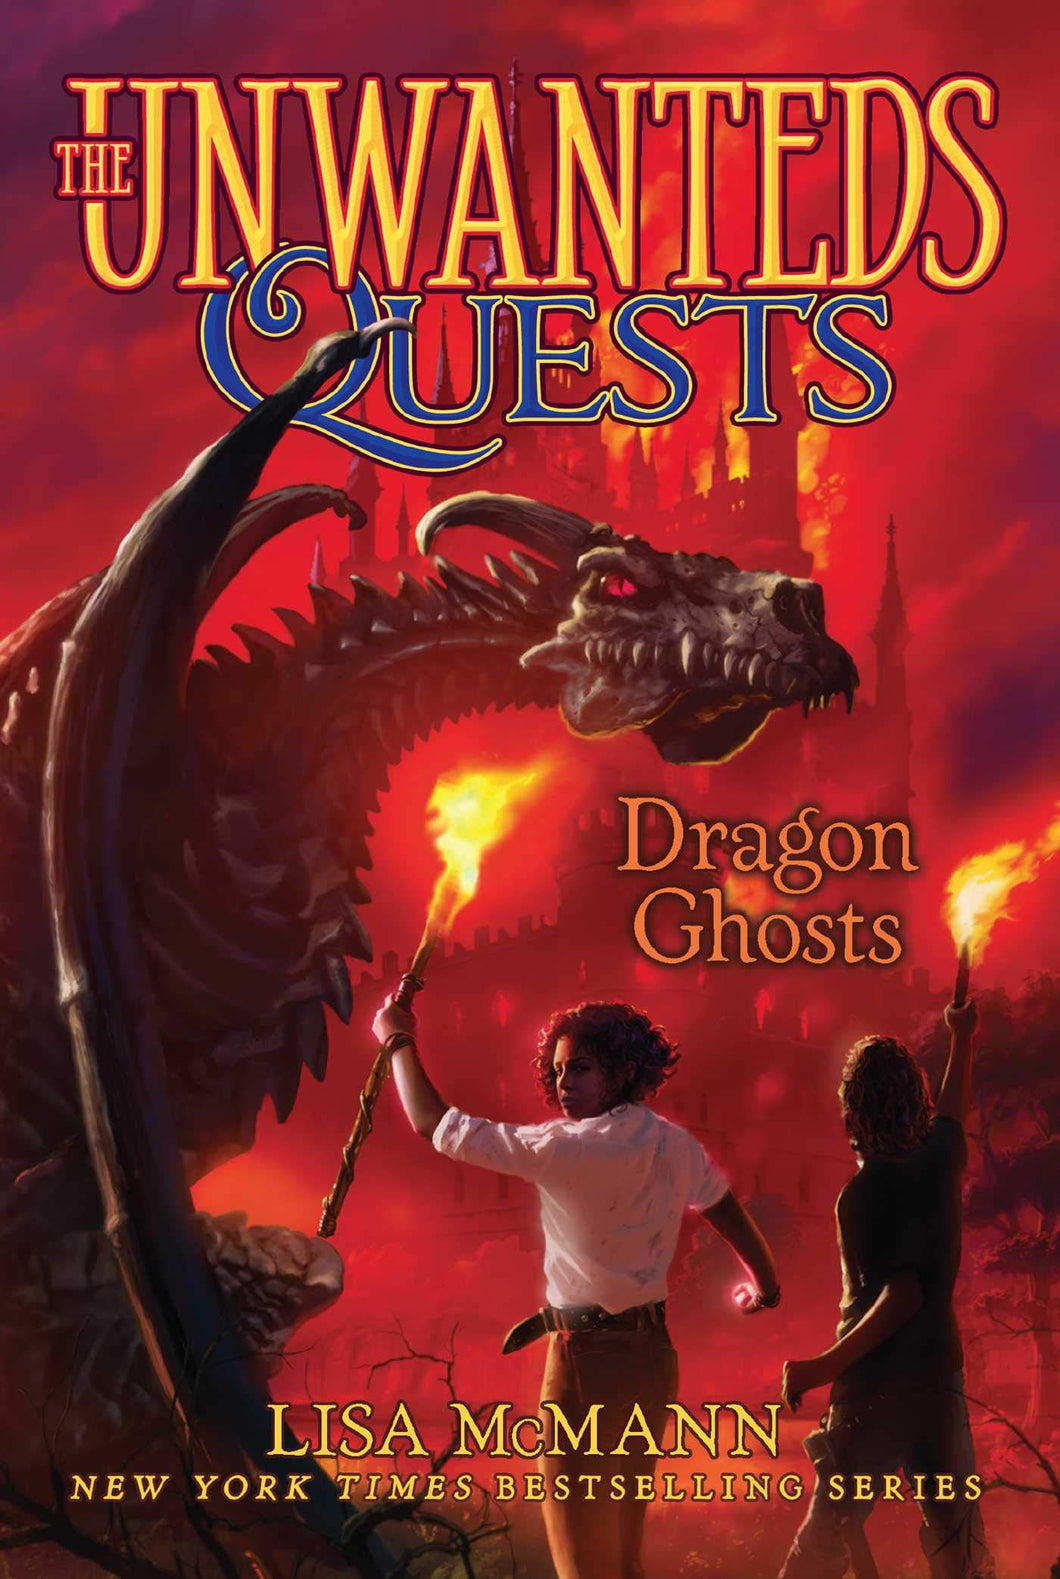 Dragon Ghosts (The Unwanteds Quests Book 3)